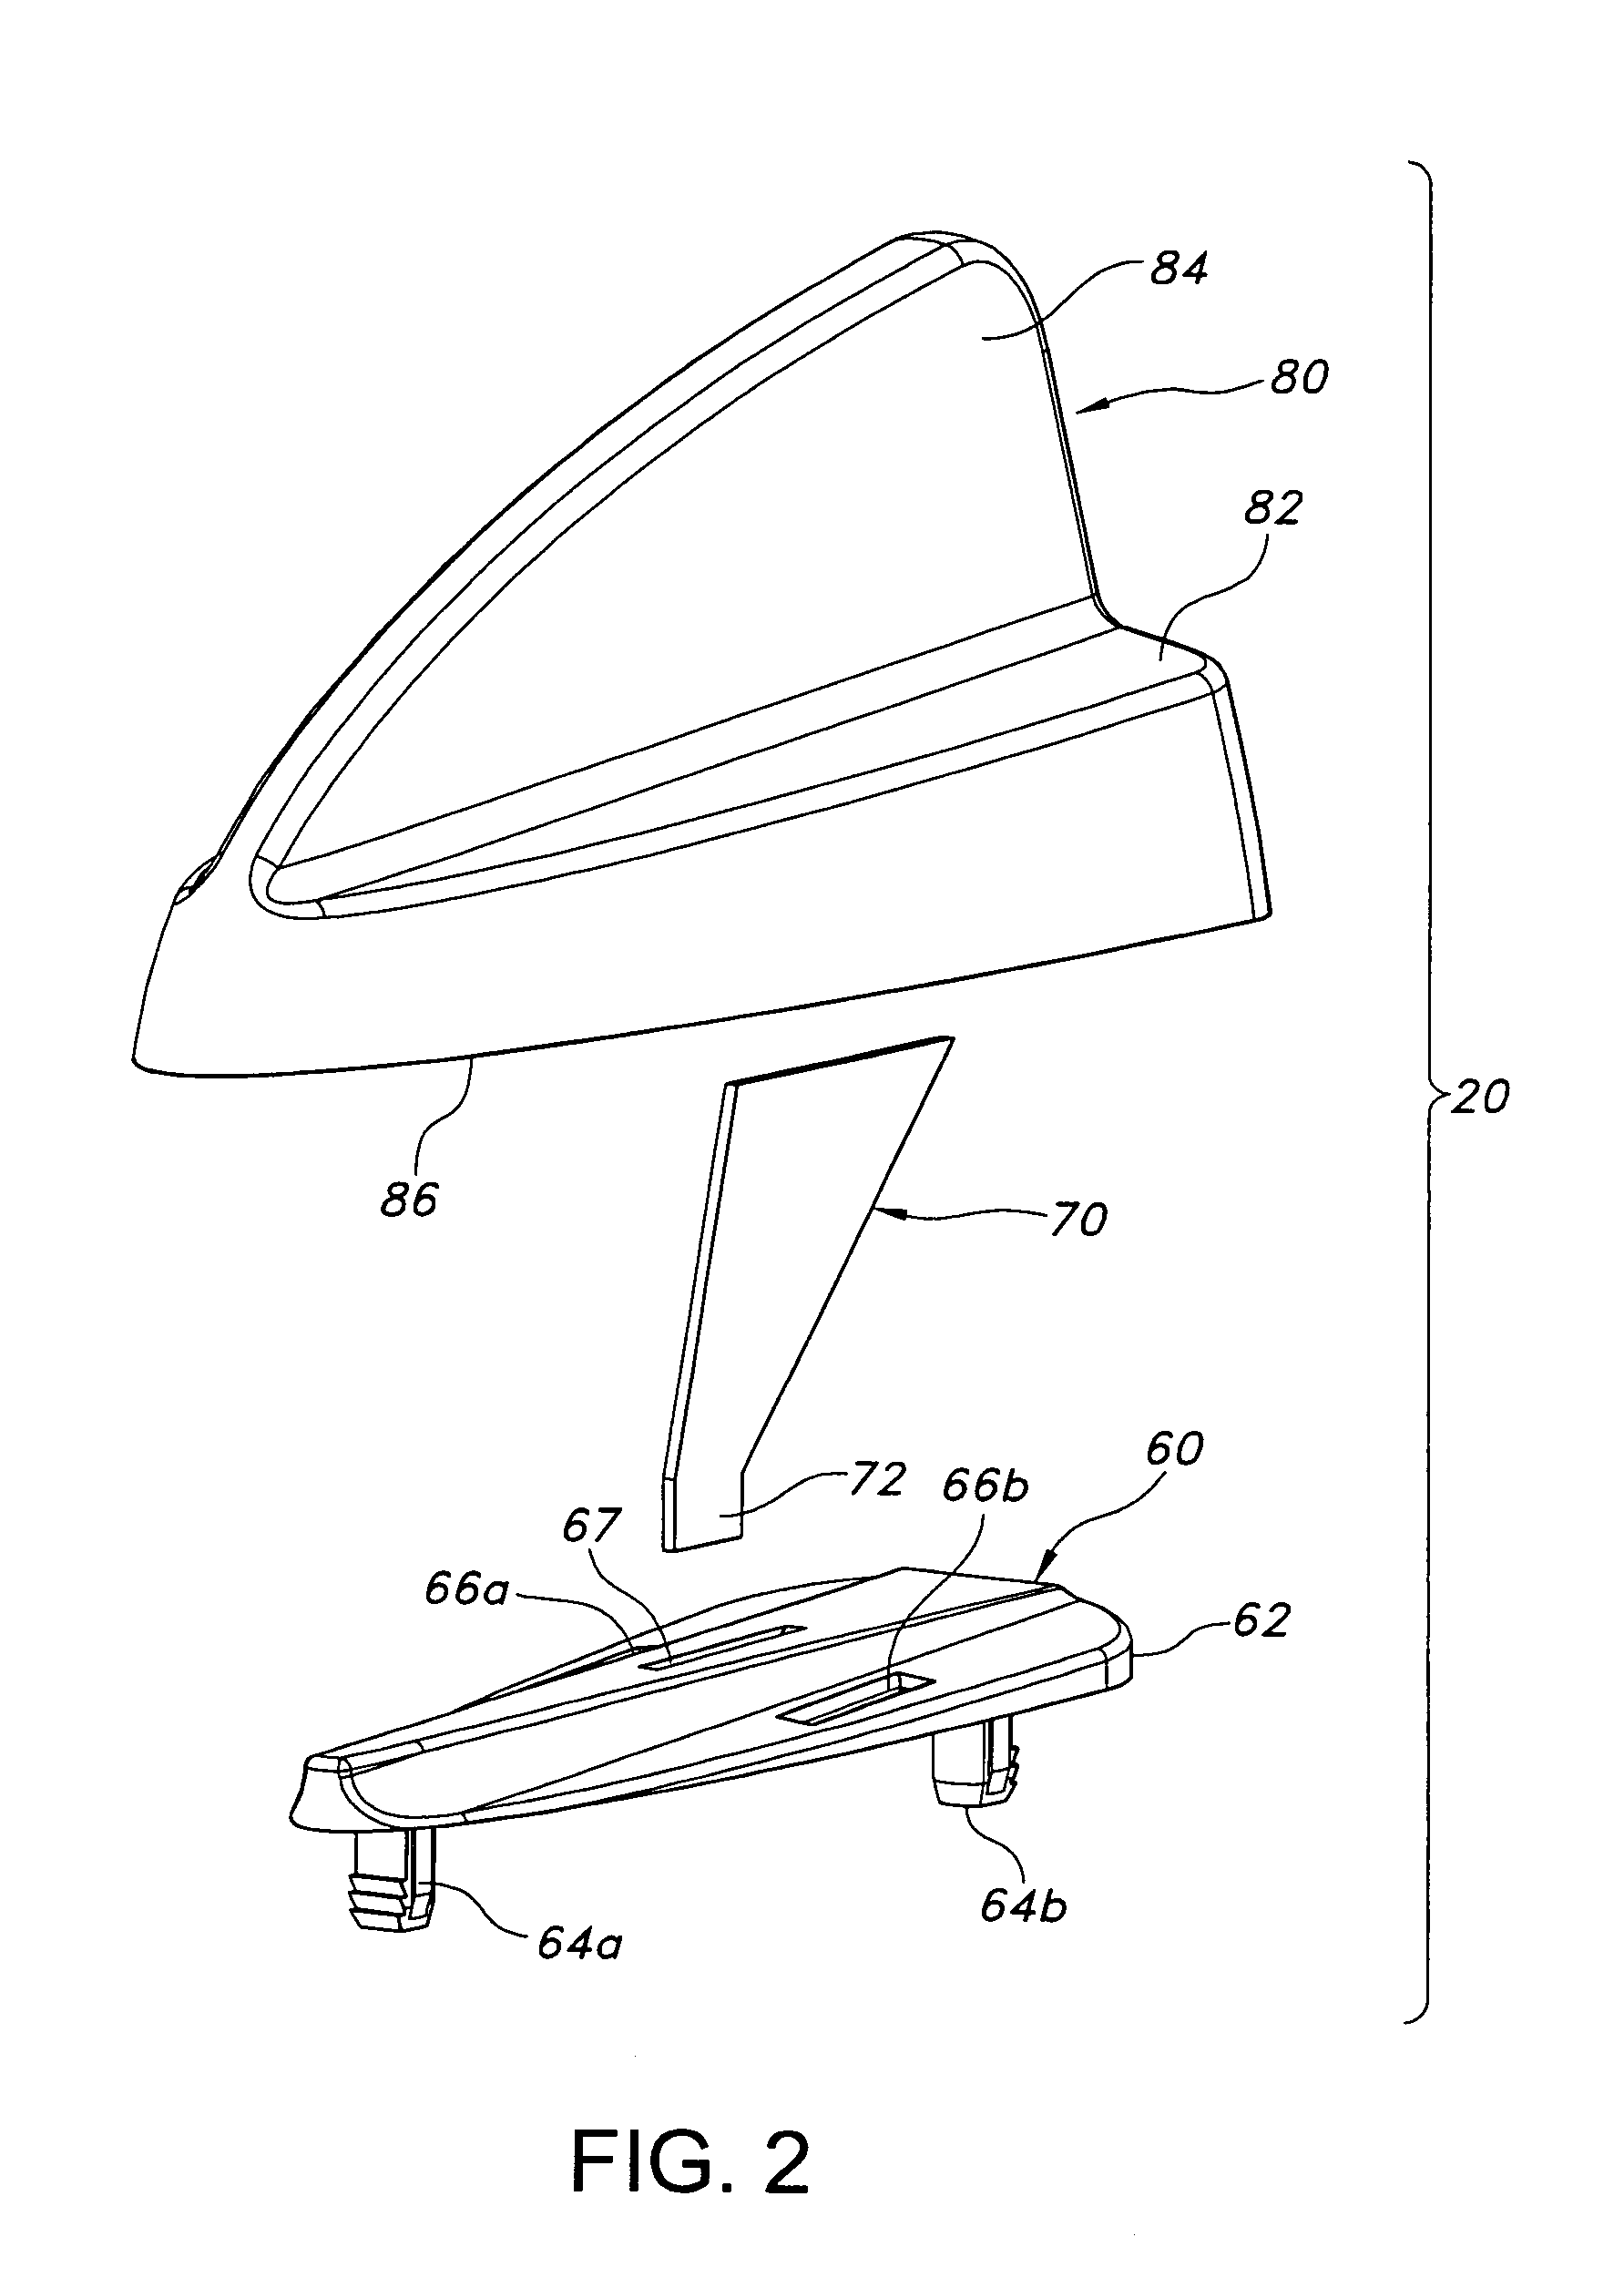 Modular antenna assembly for automotive vehicles